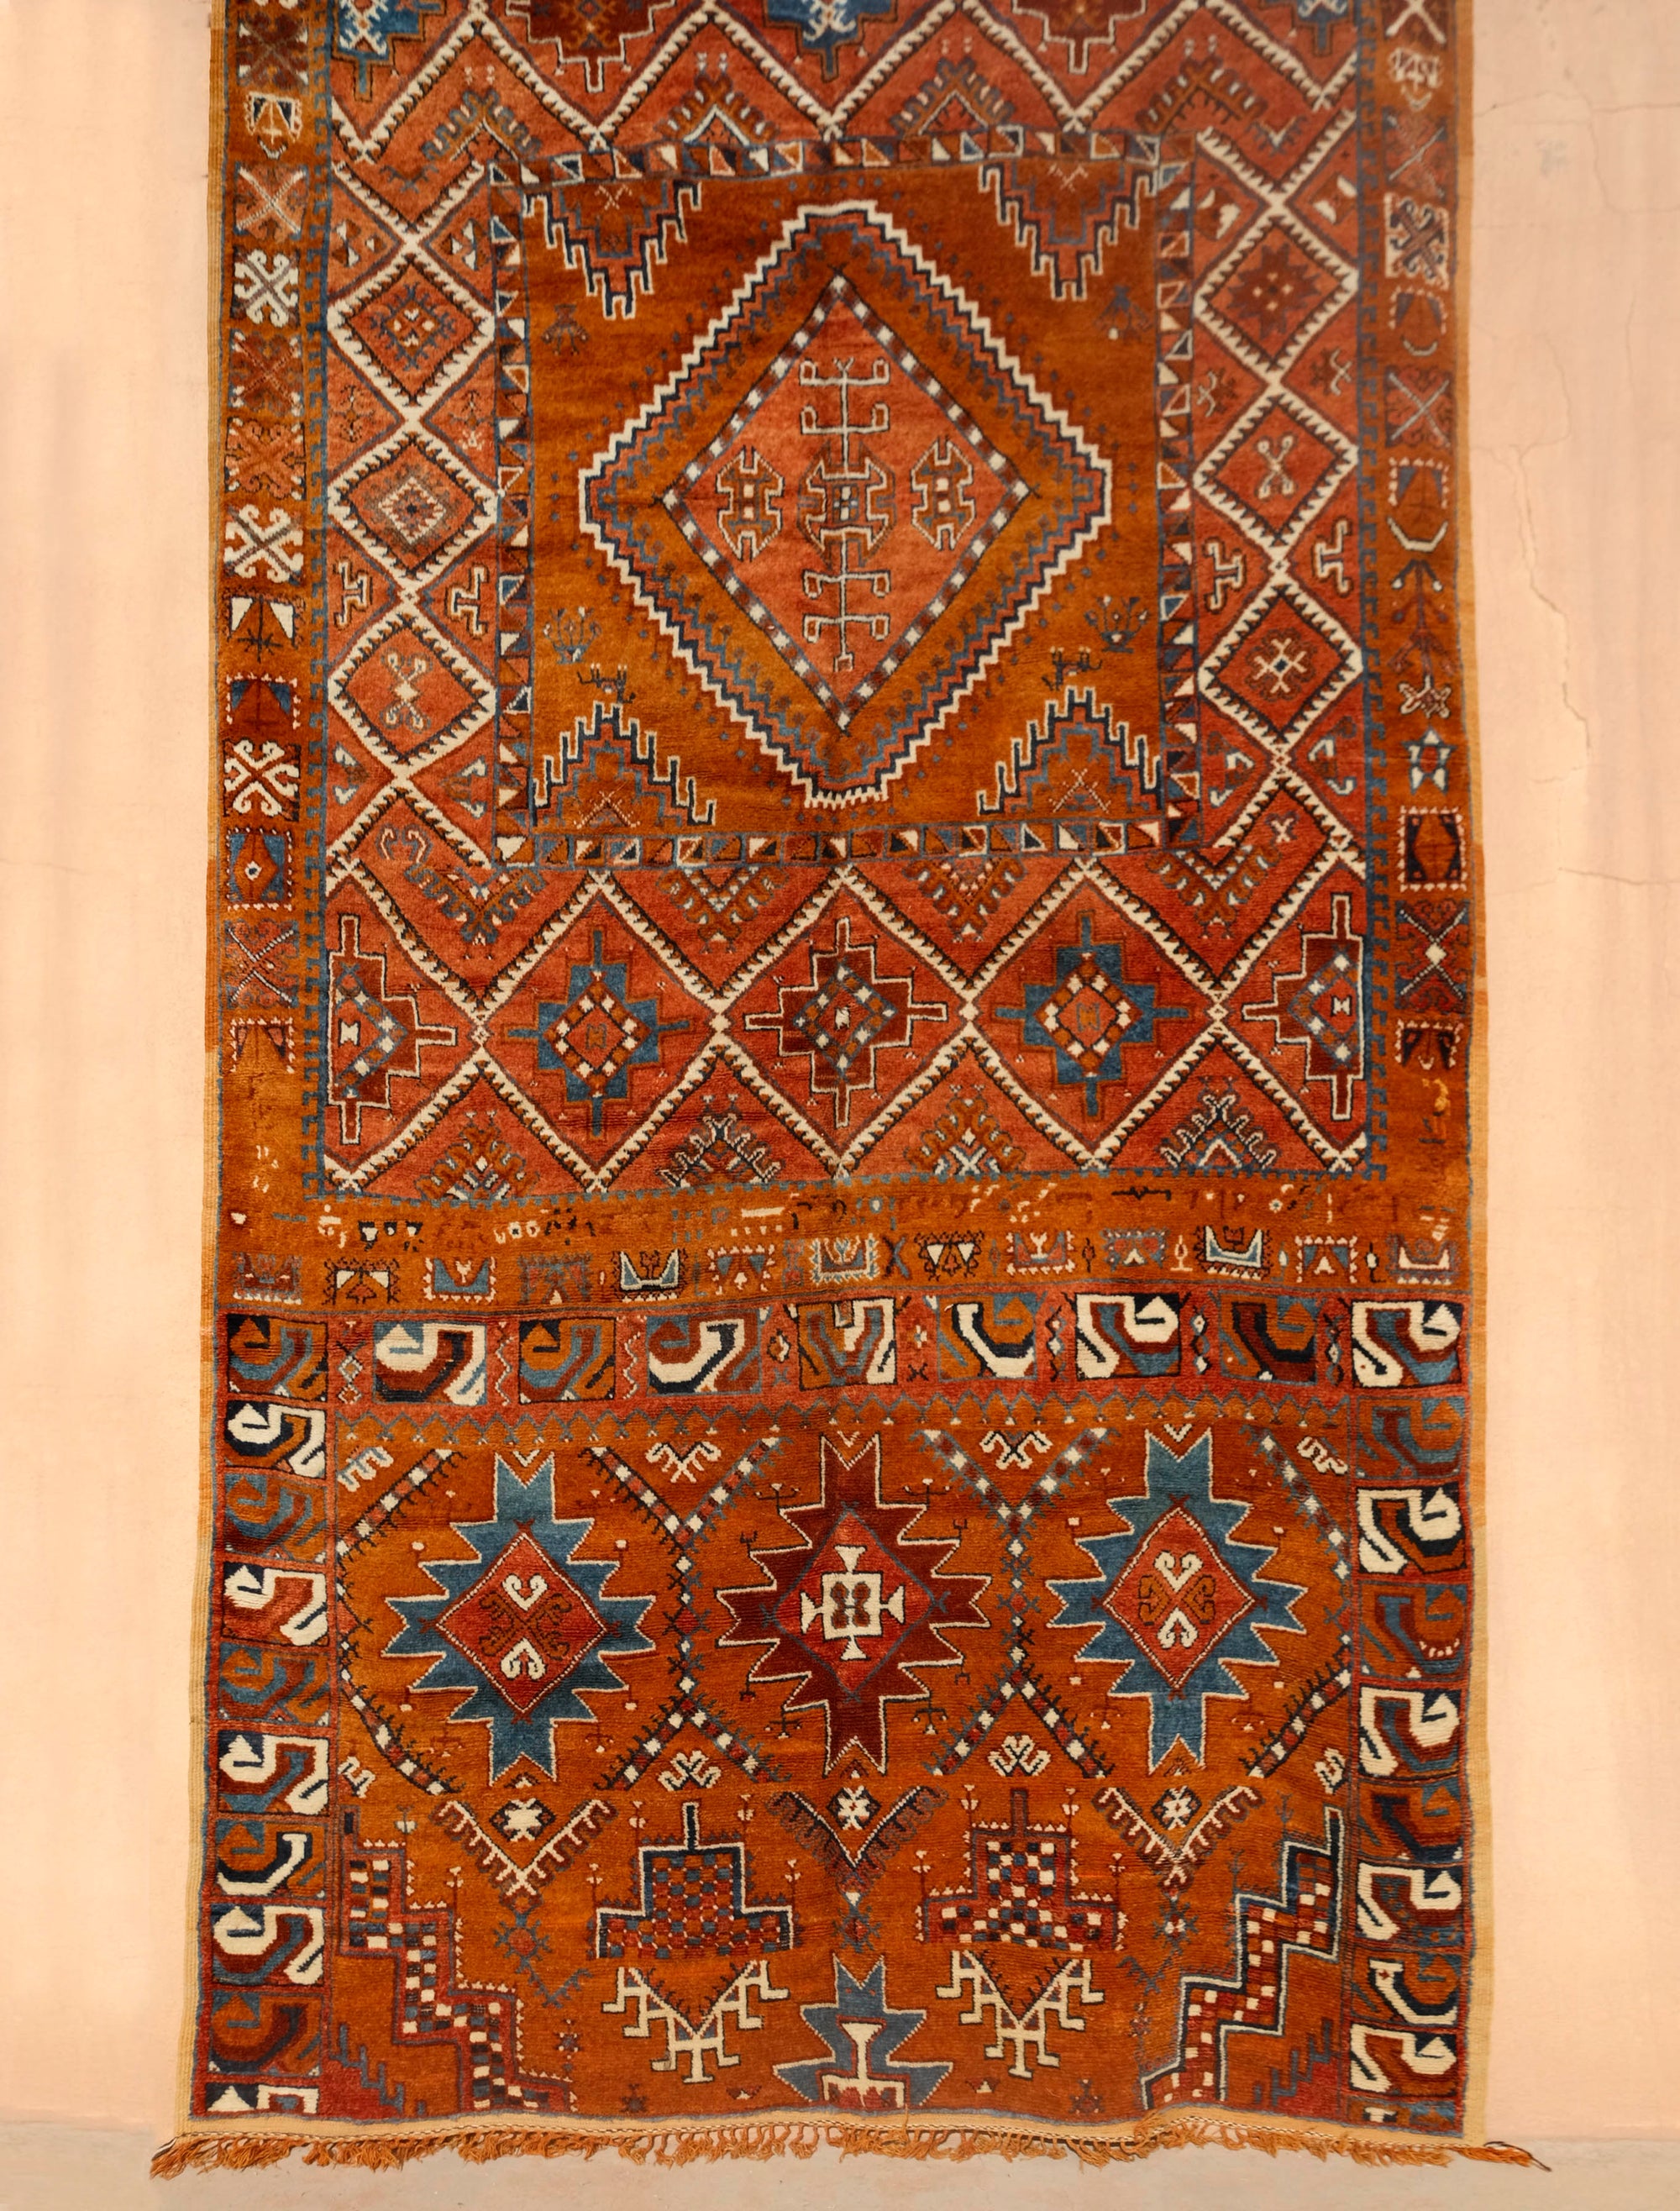 Explore our "One of a Kind" Moroccan Berber Rugs—Glawi, Tazahnat, Beni Guild. Crafted by skilled artisans, each piece is a unique masterpiece, blending tradition with individuality.